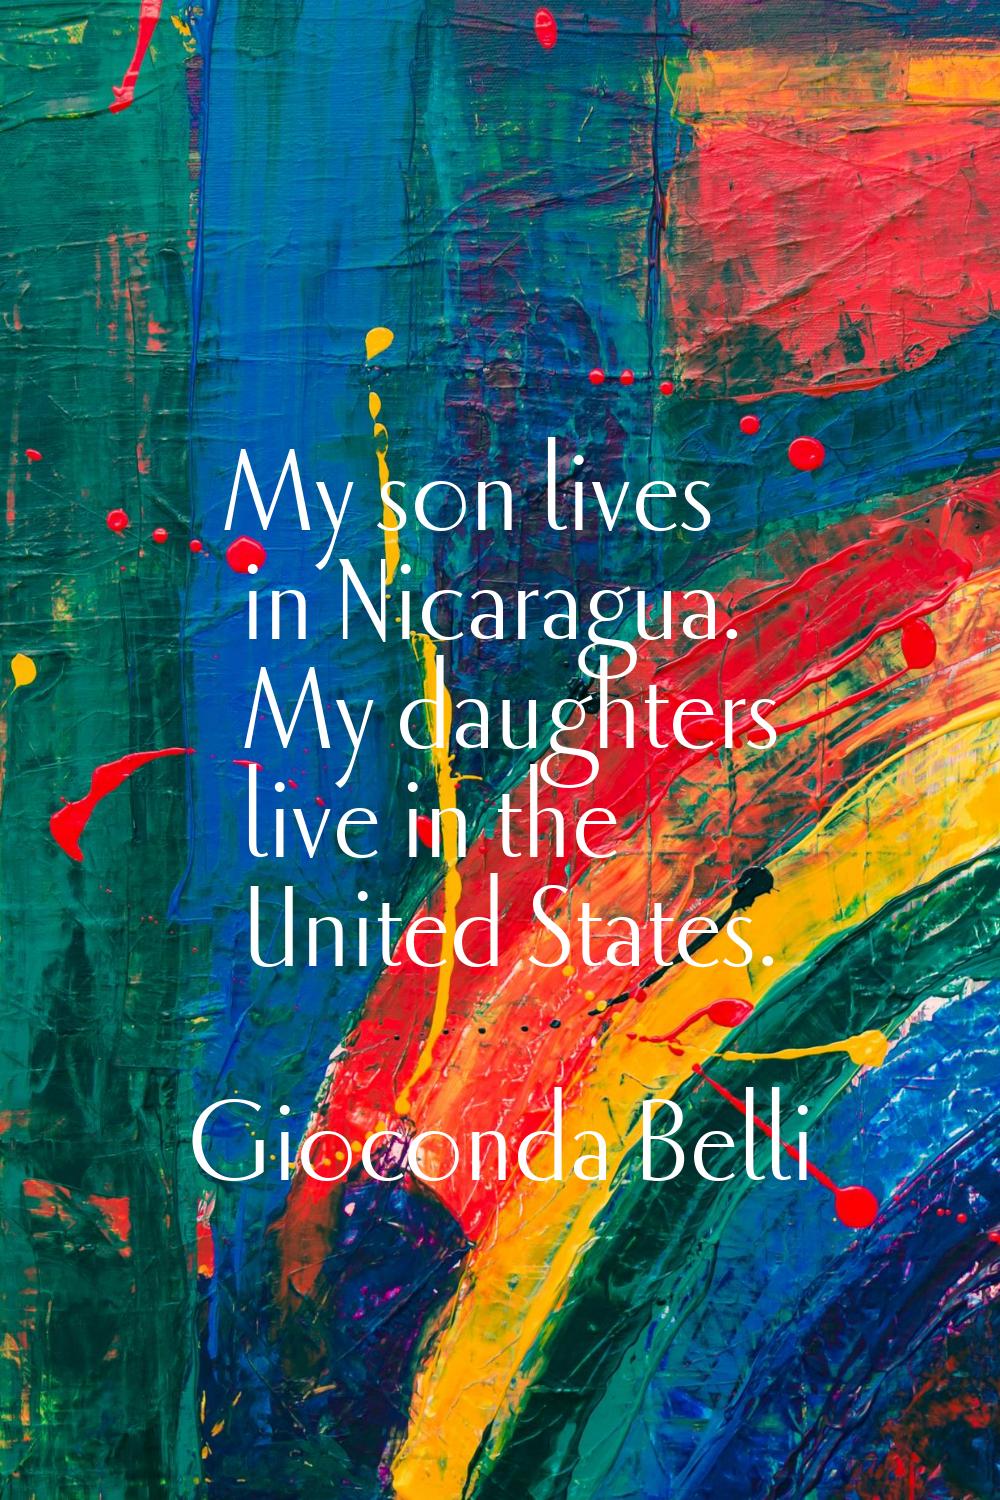 My son lives in Nicaragua. My daughters live in the United States.